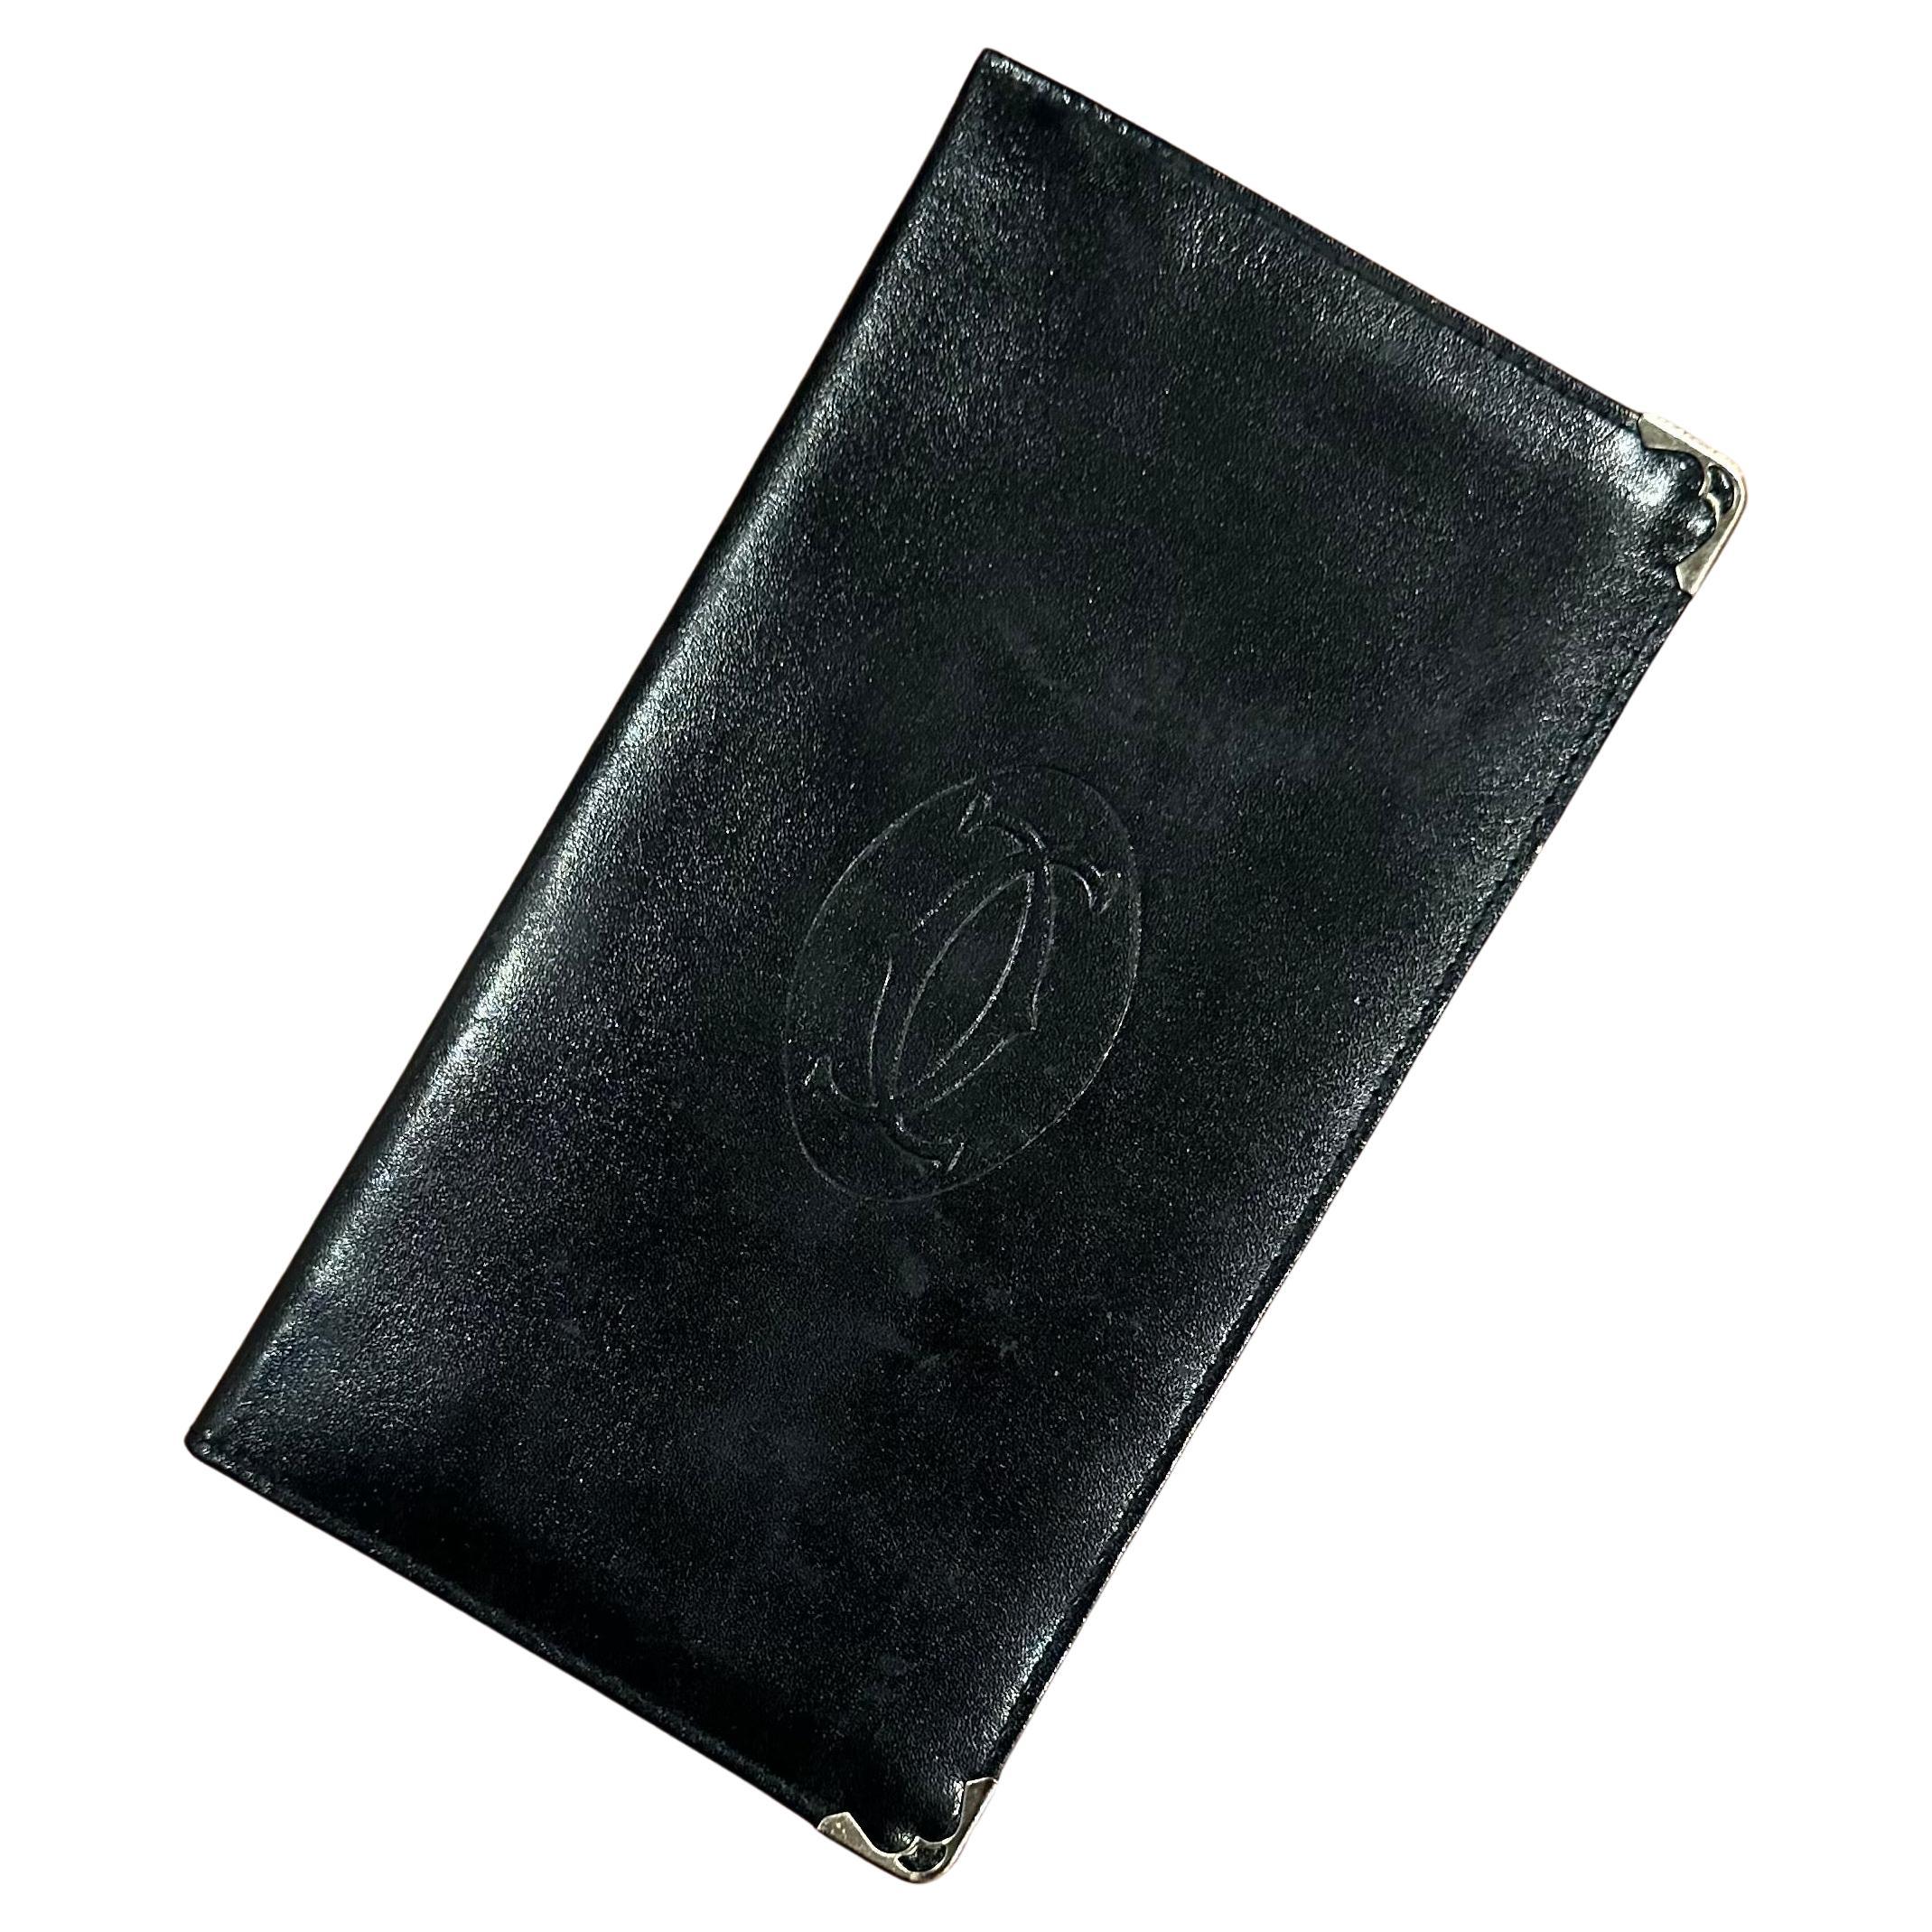 Vintage Black Leather "Logo" Wallet / Checkbook Cover by Cartier For Sale